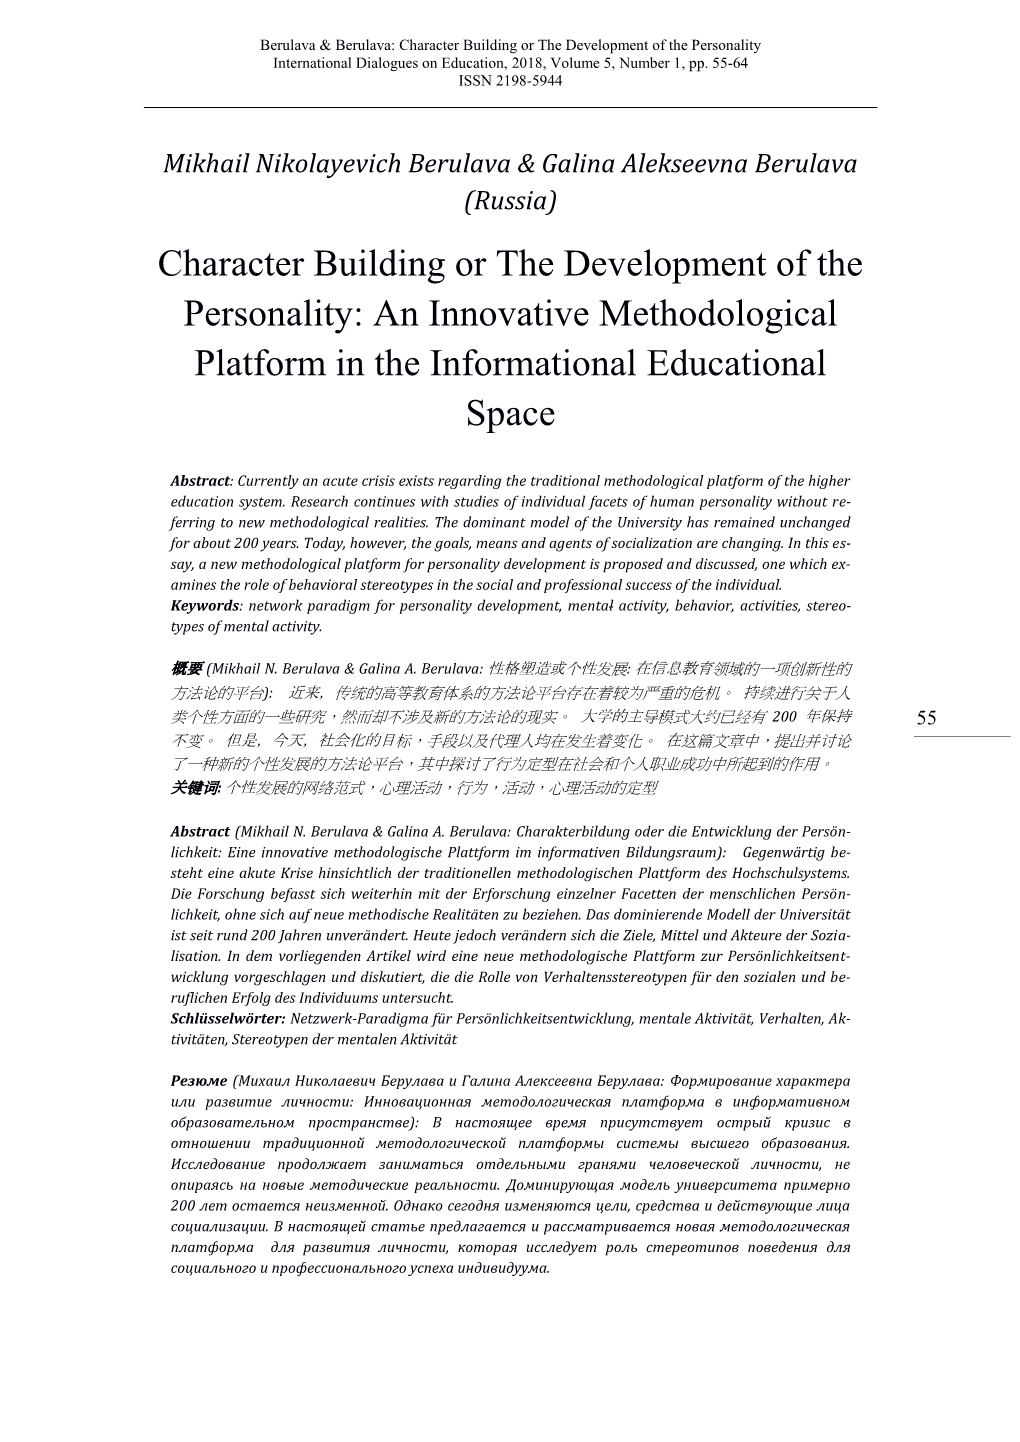 Character Building Or the Development of the Personality International Dialogues on Education, 2018, Volume 5, Number 1, Pp